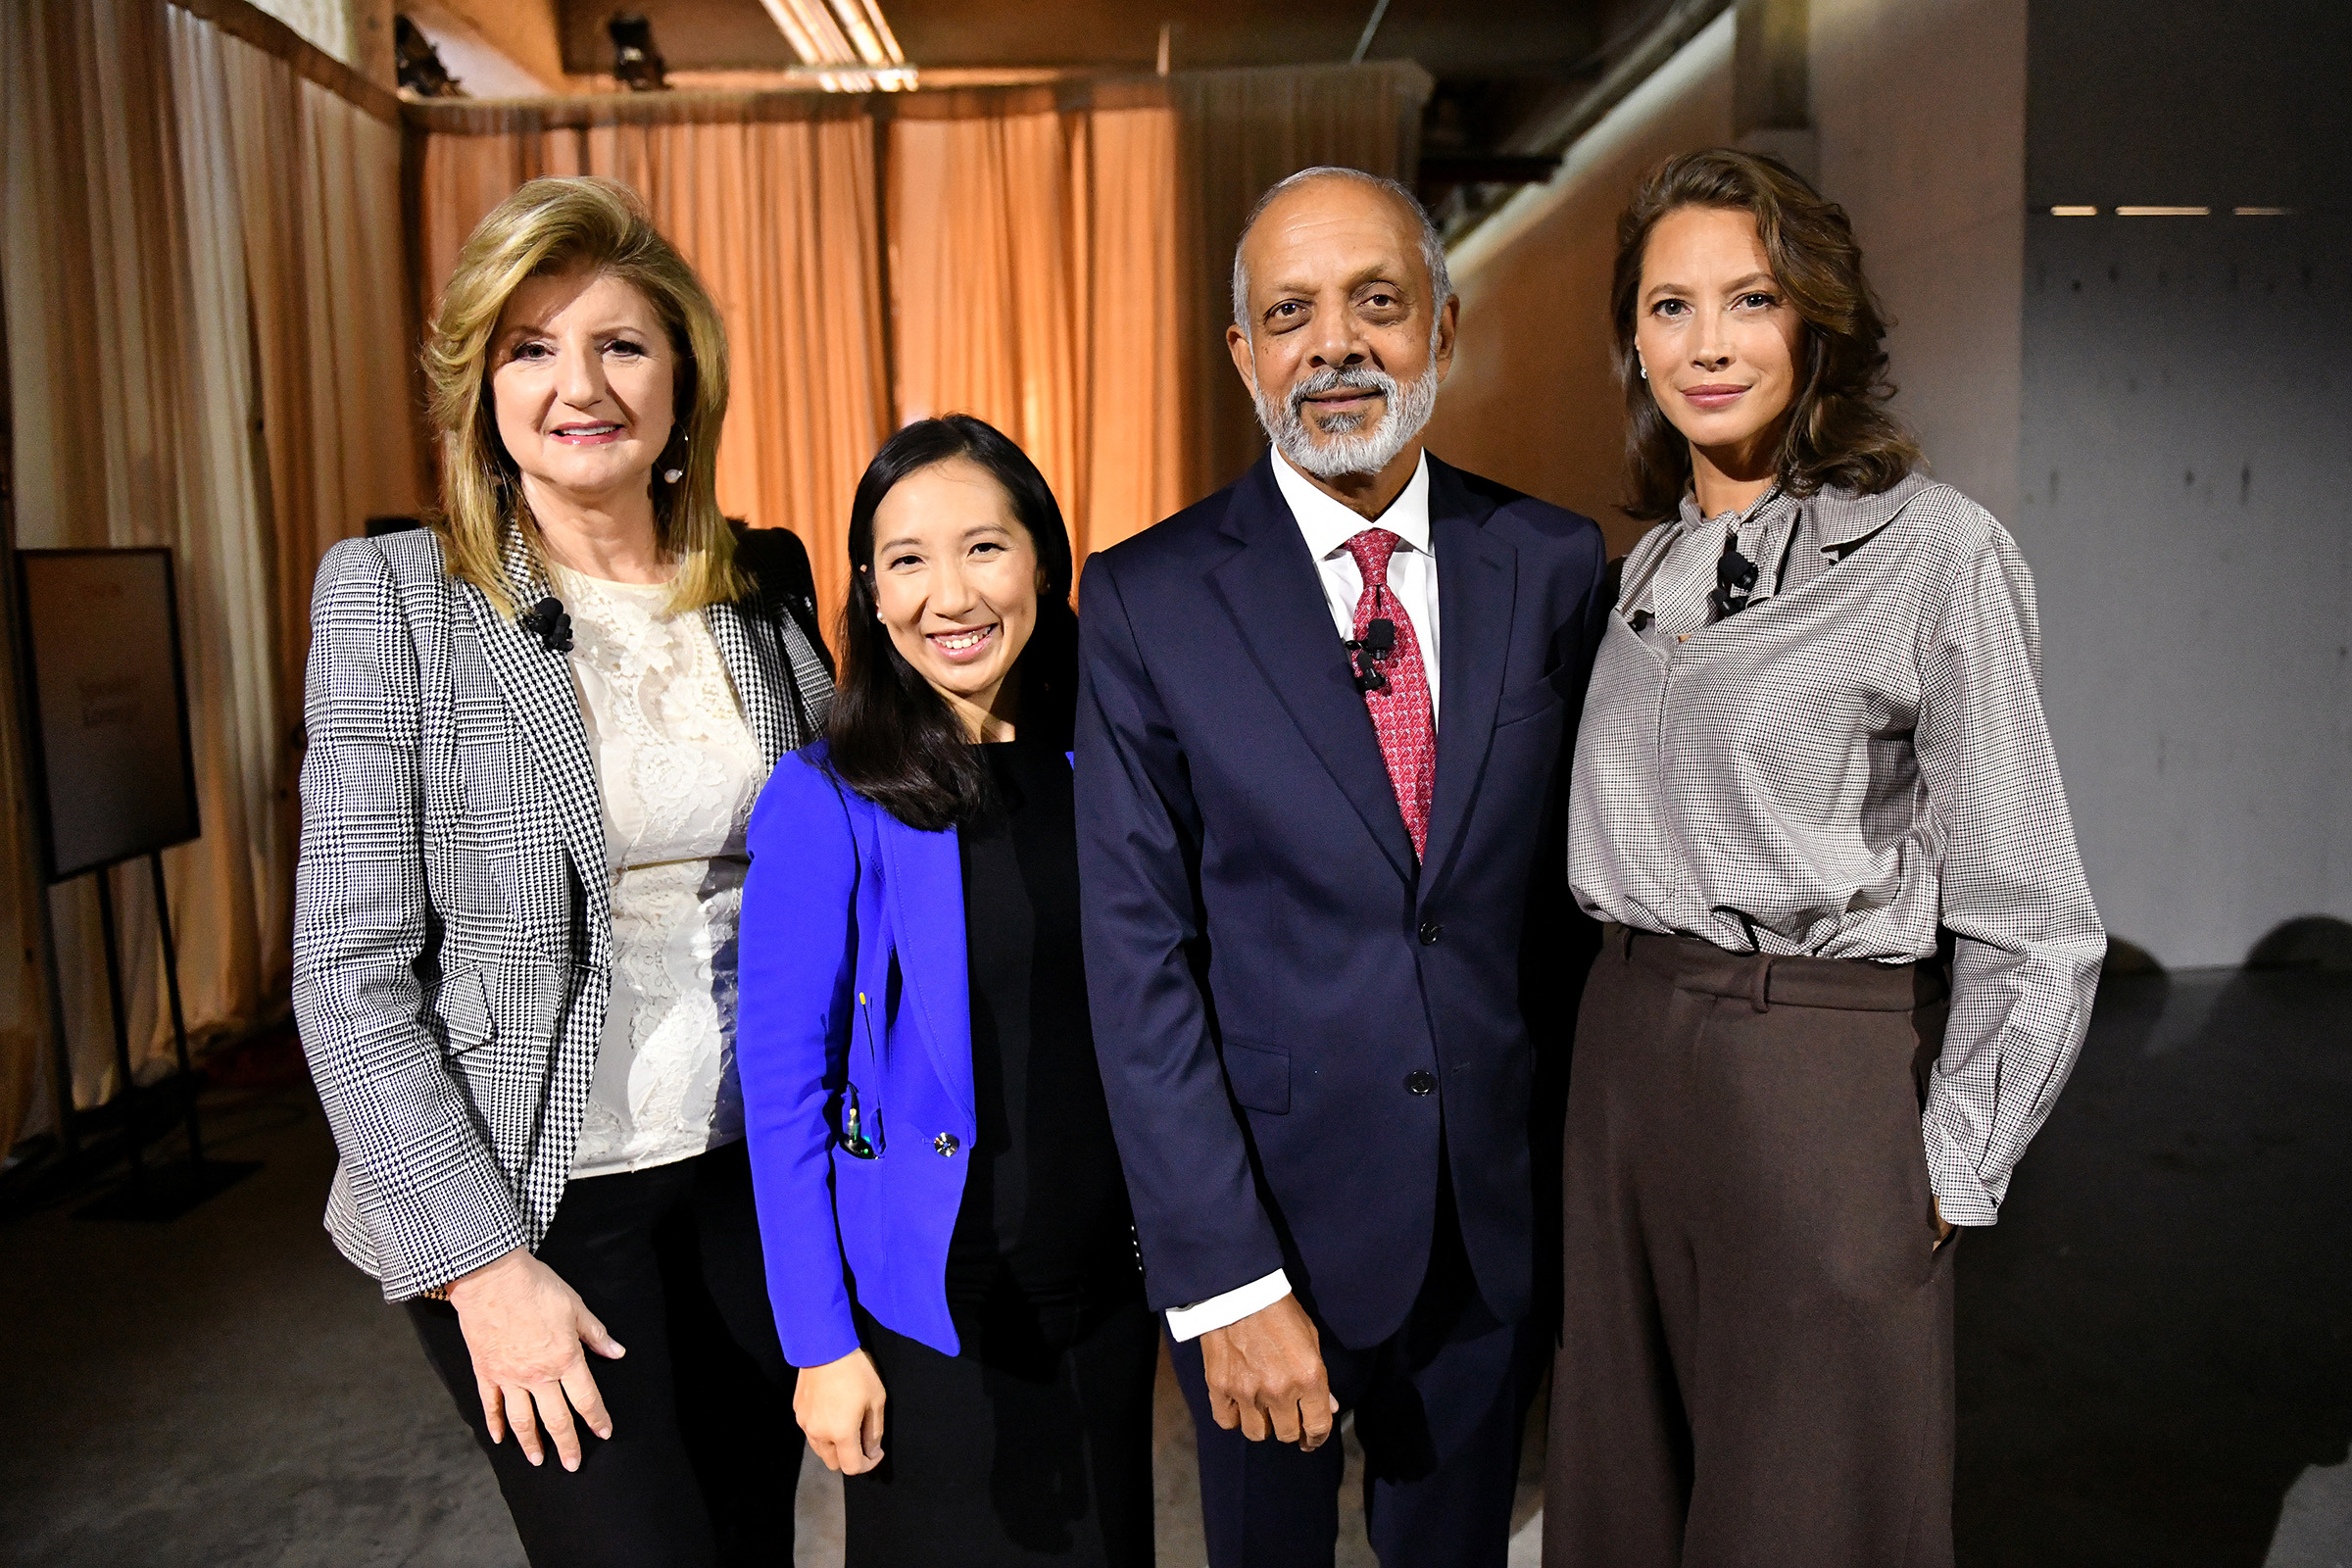 (L-R) Arianna Huffington, Dr. Leana Wen, Dr. Naveen Rao and Christy Turlington Burns pose backstage during the TIME 100 Health Summit at Pier 17 in New York City on Oct. 17, 2019. (Craig Barritt—Getty Images for TIME 100 Health)